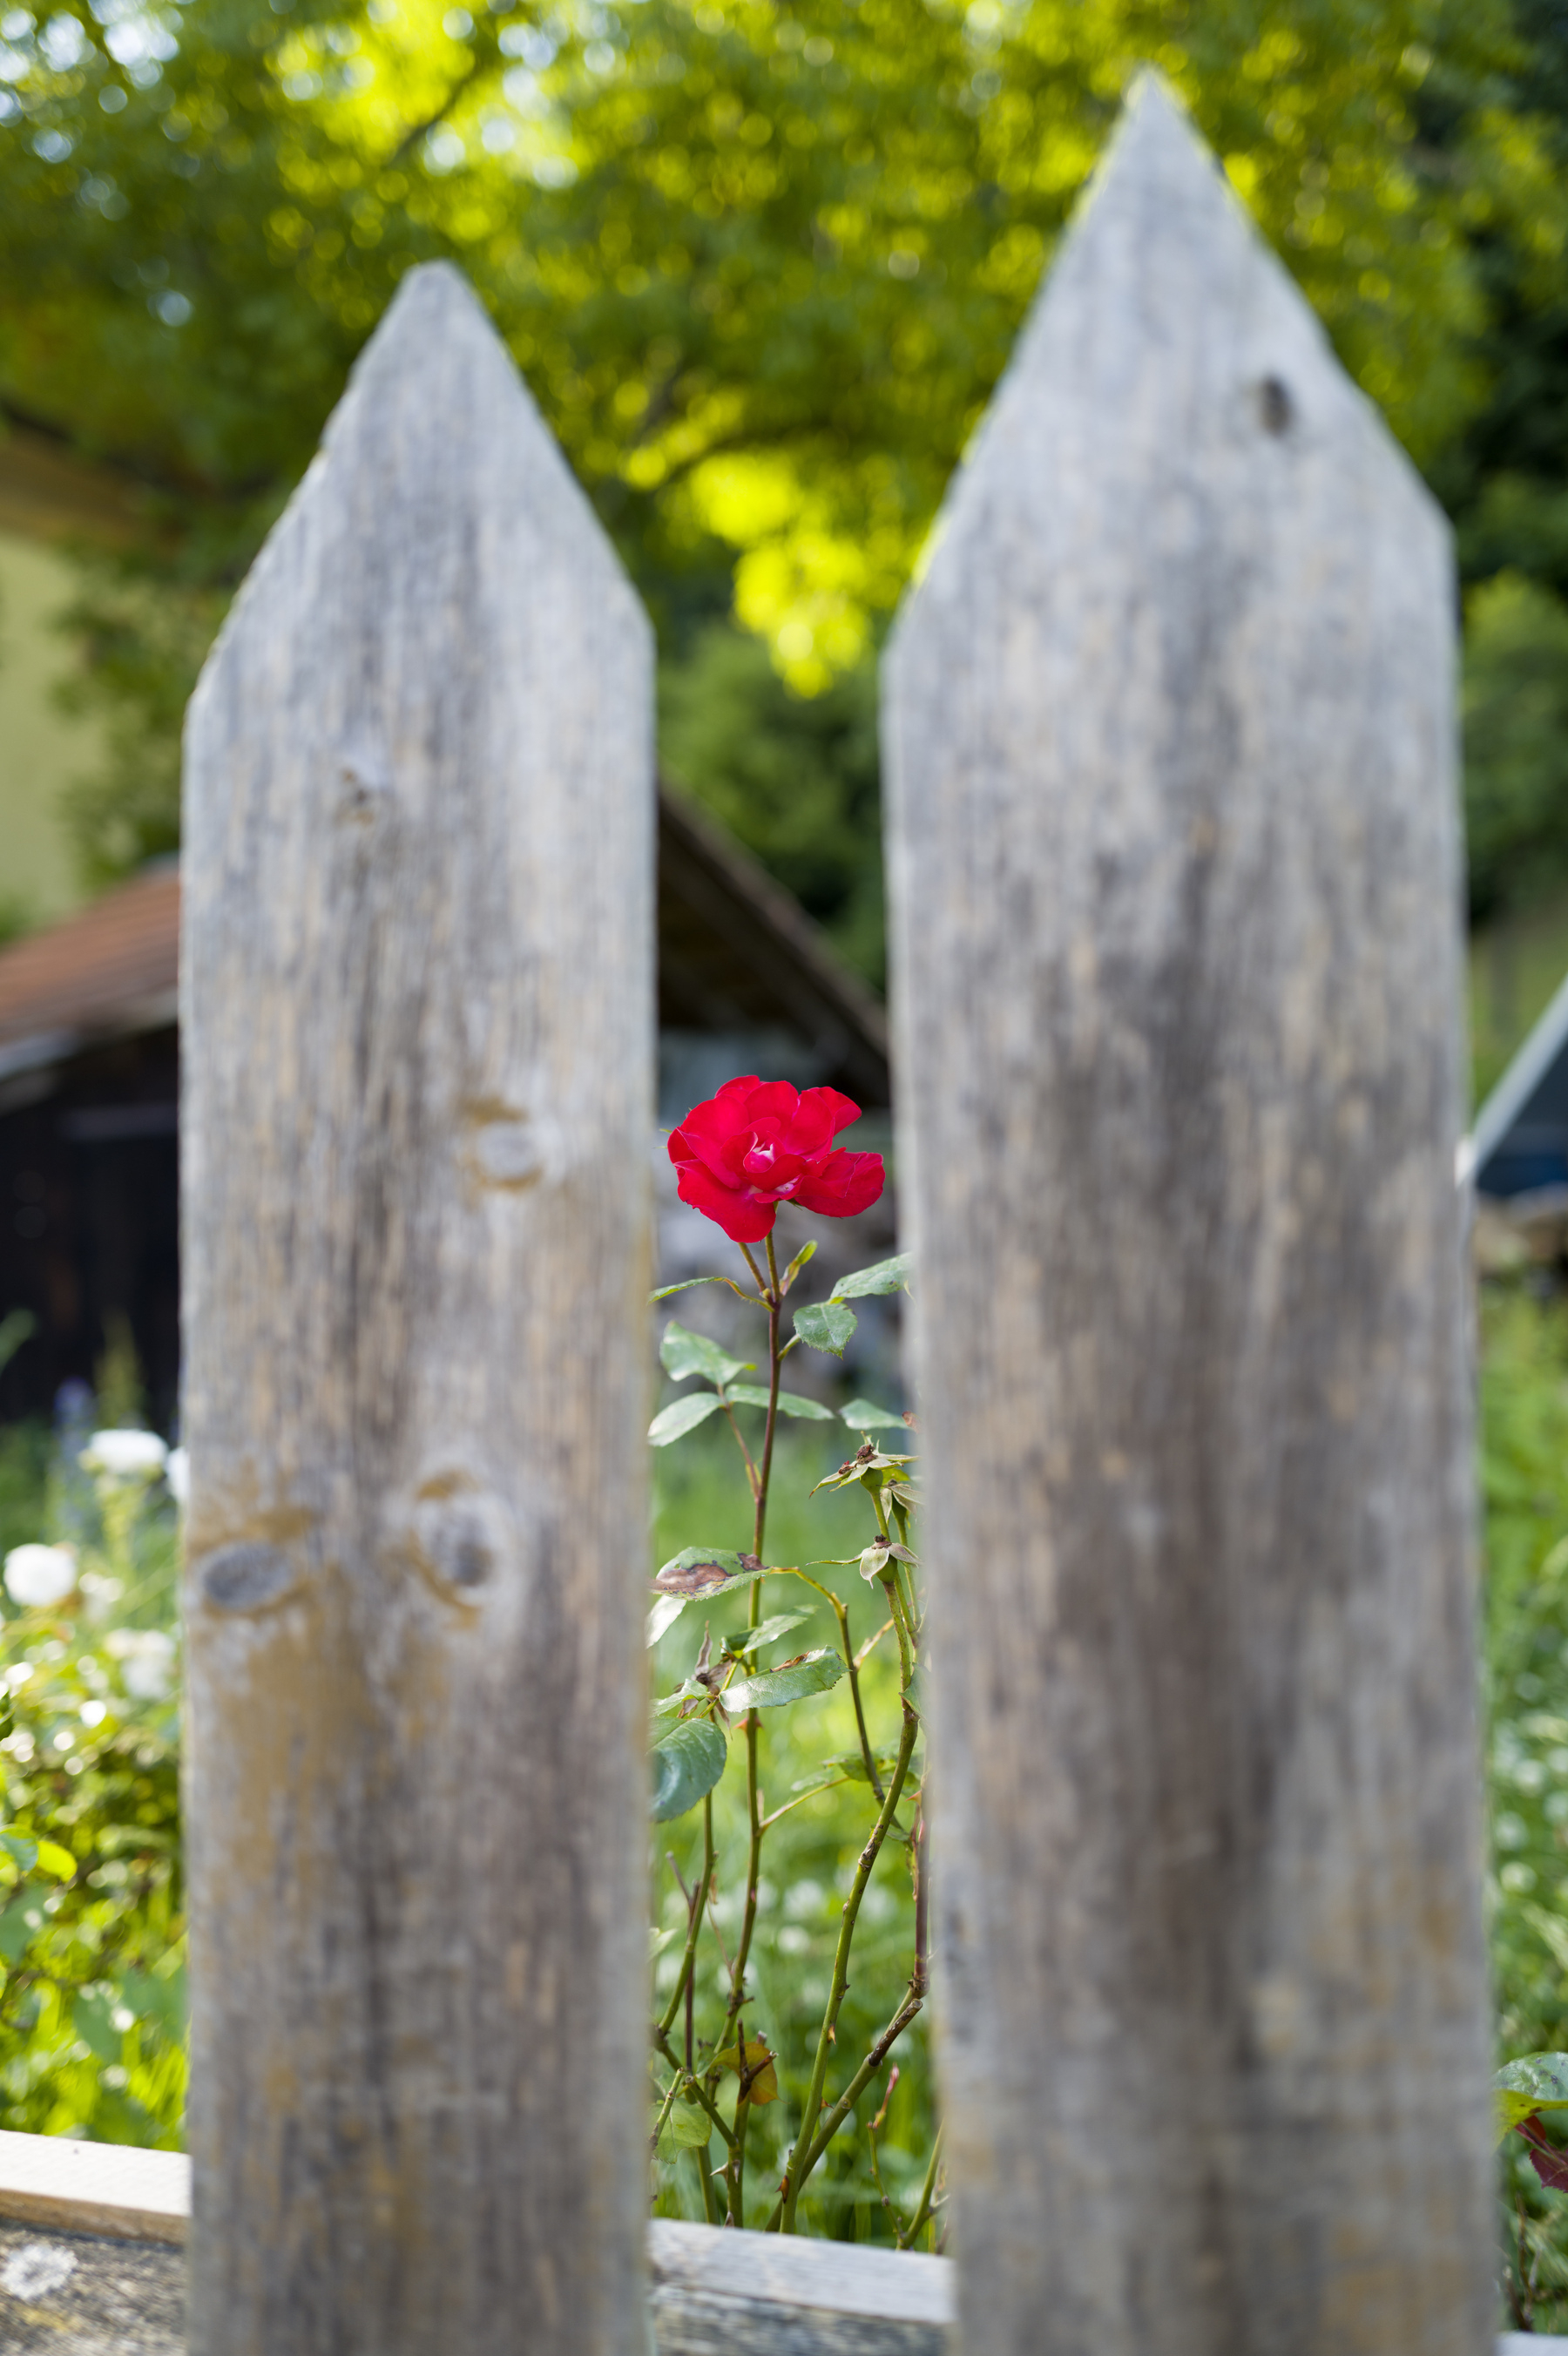 A red rose past its prime seen through two greyed-out, aged slats of a wooden fence with pointy tips. The rose is in focus, the fence and the background of trees, shrubbery, and parts of a building are out of focus. 